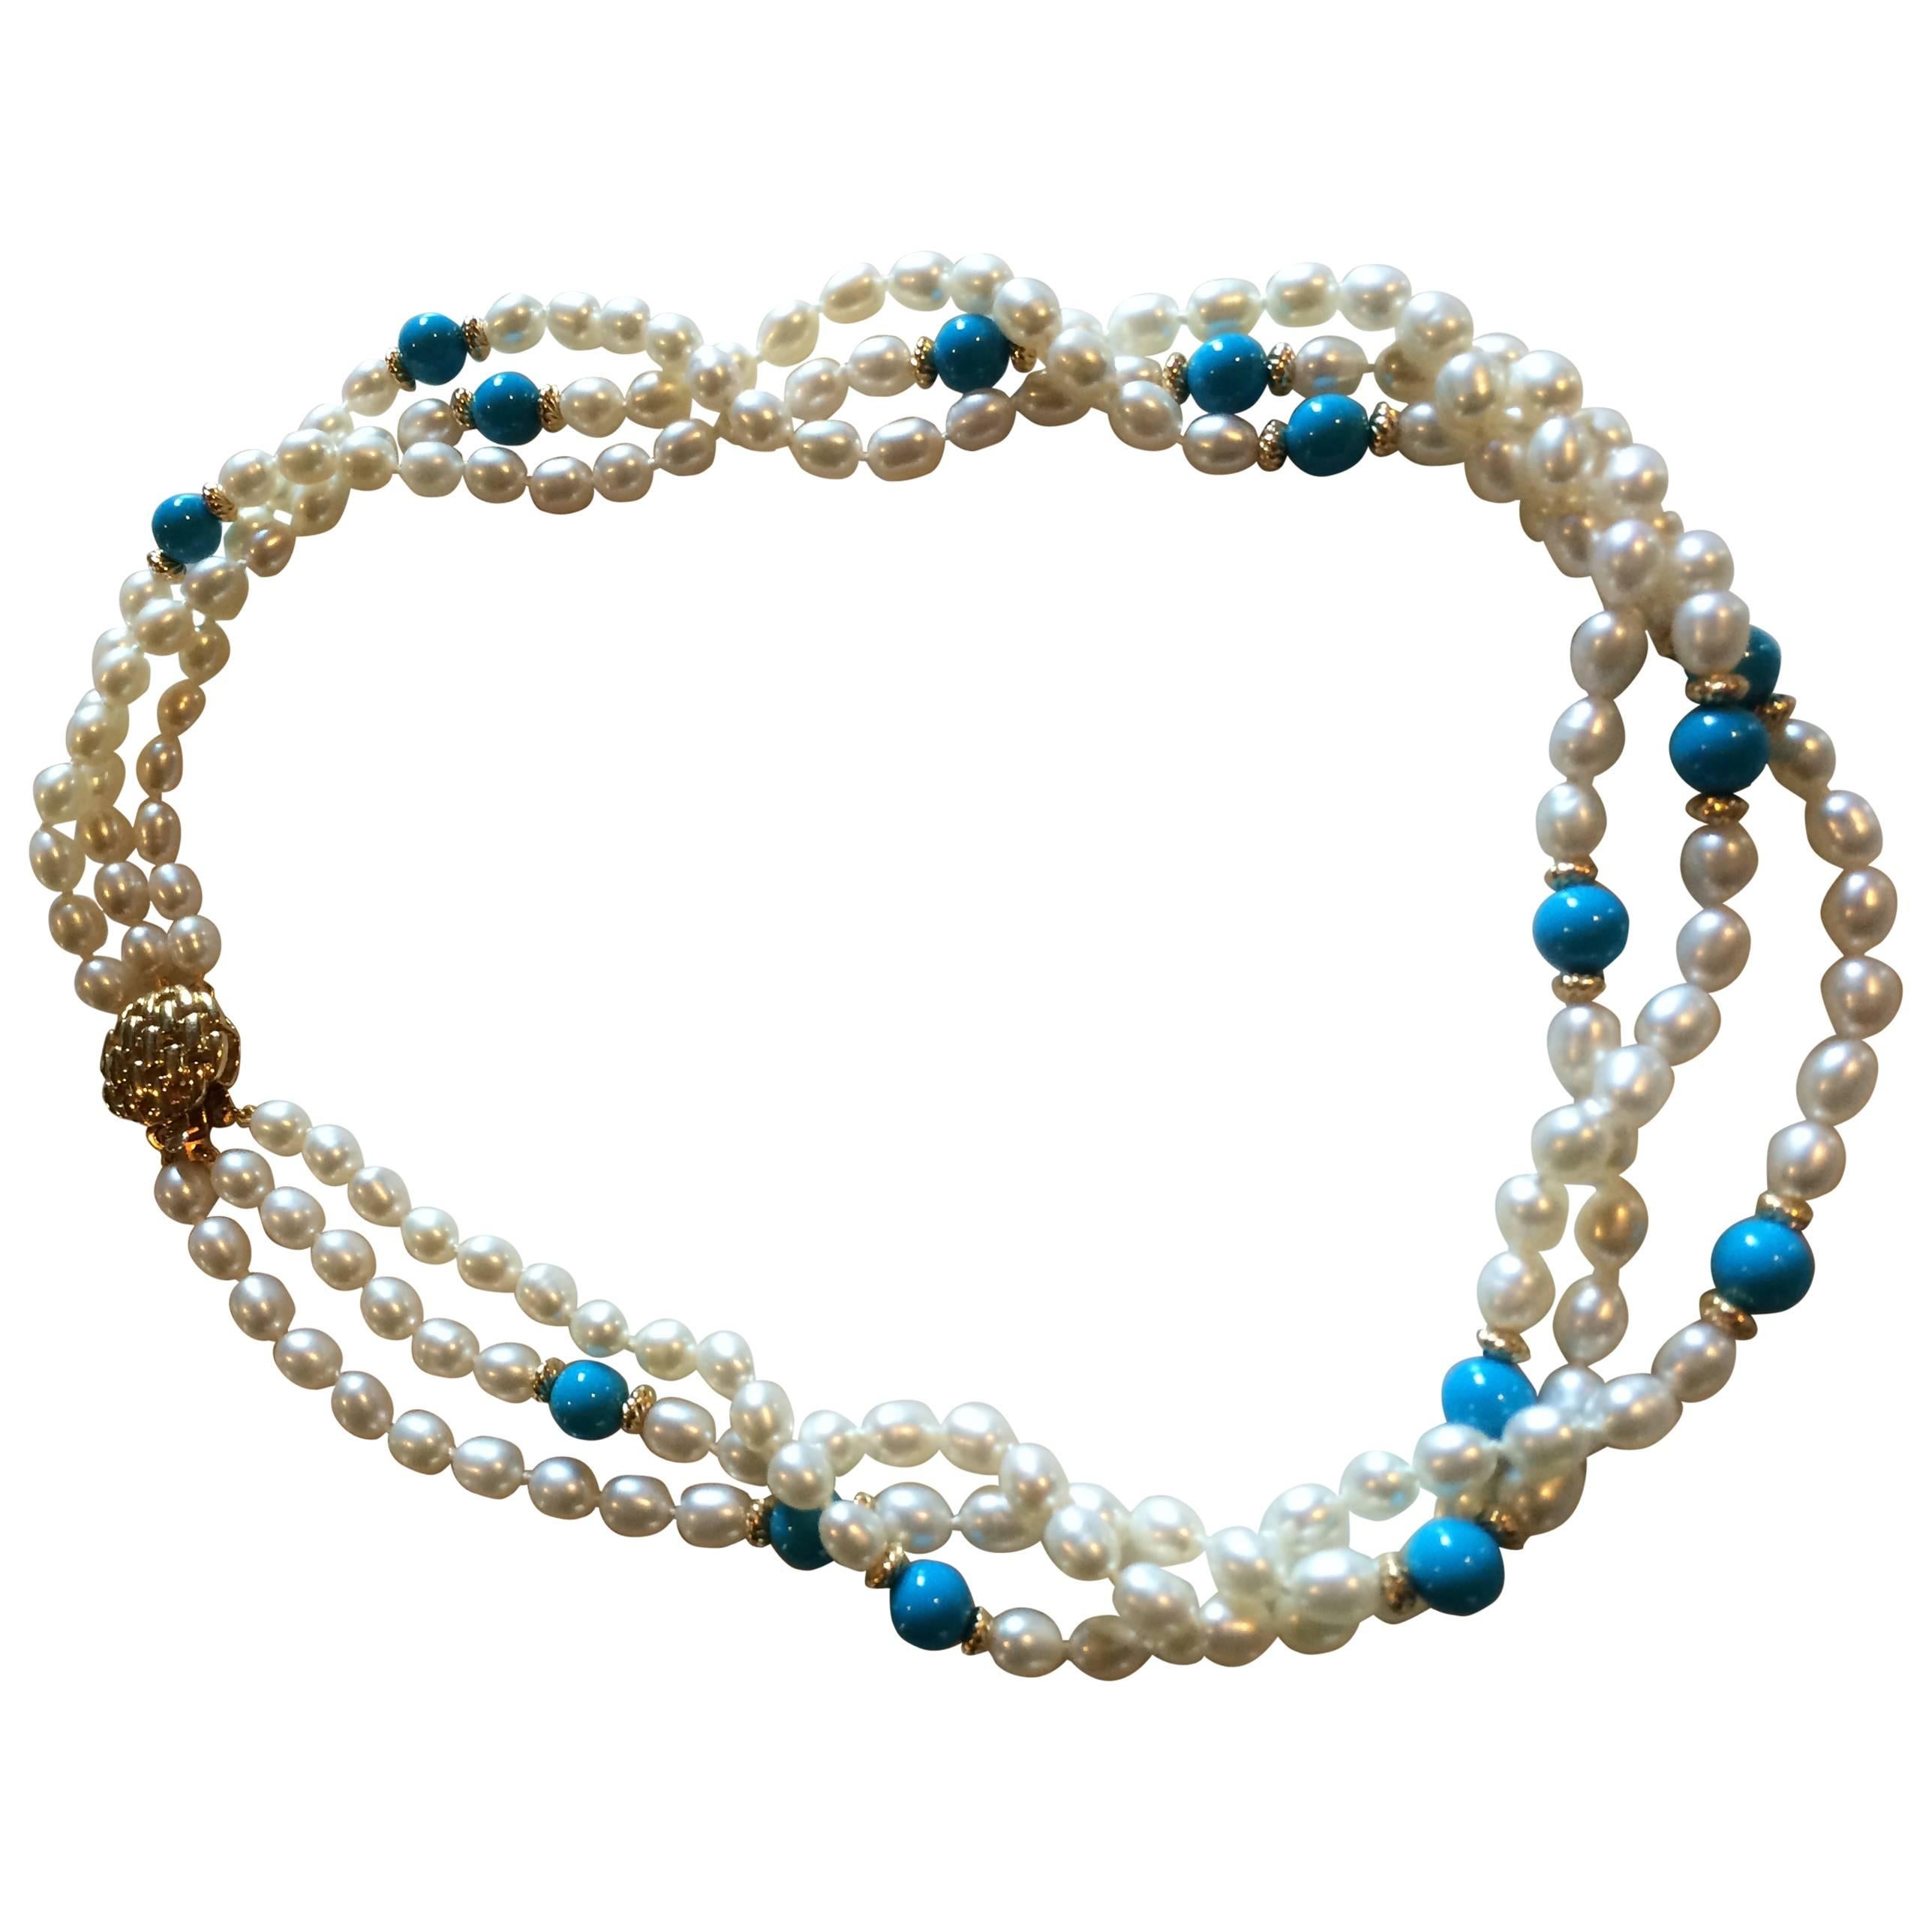 Pearl tourquoise 3 strand necklace